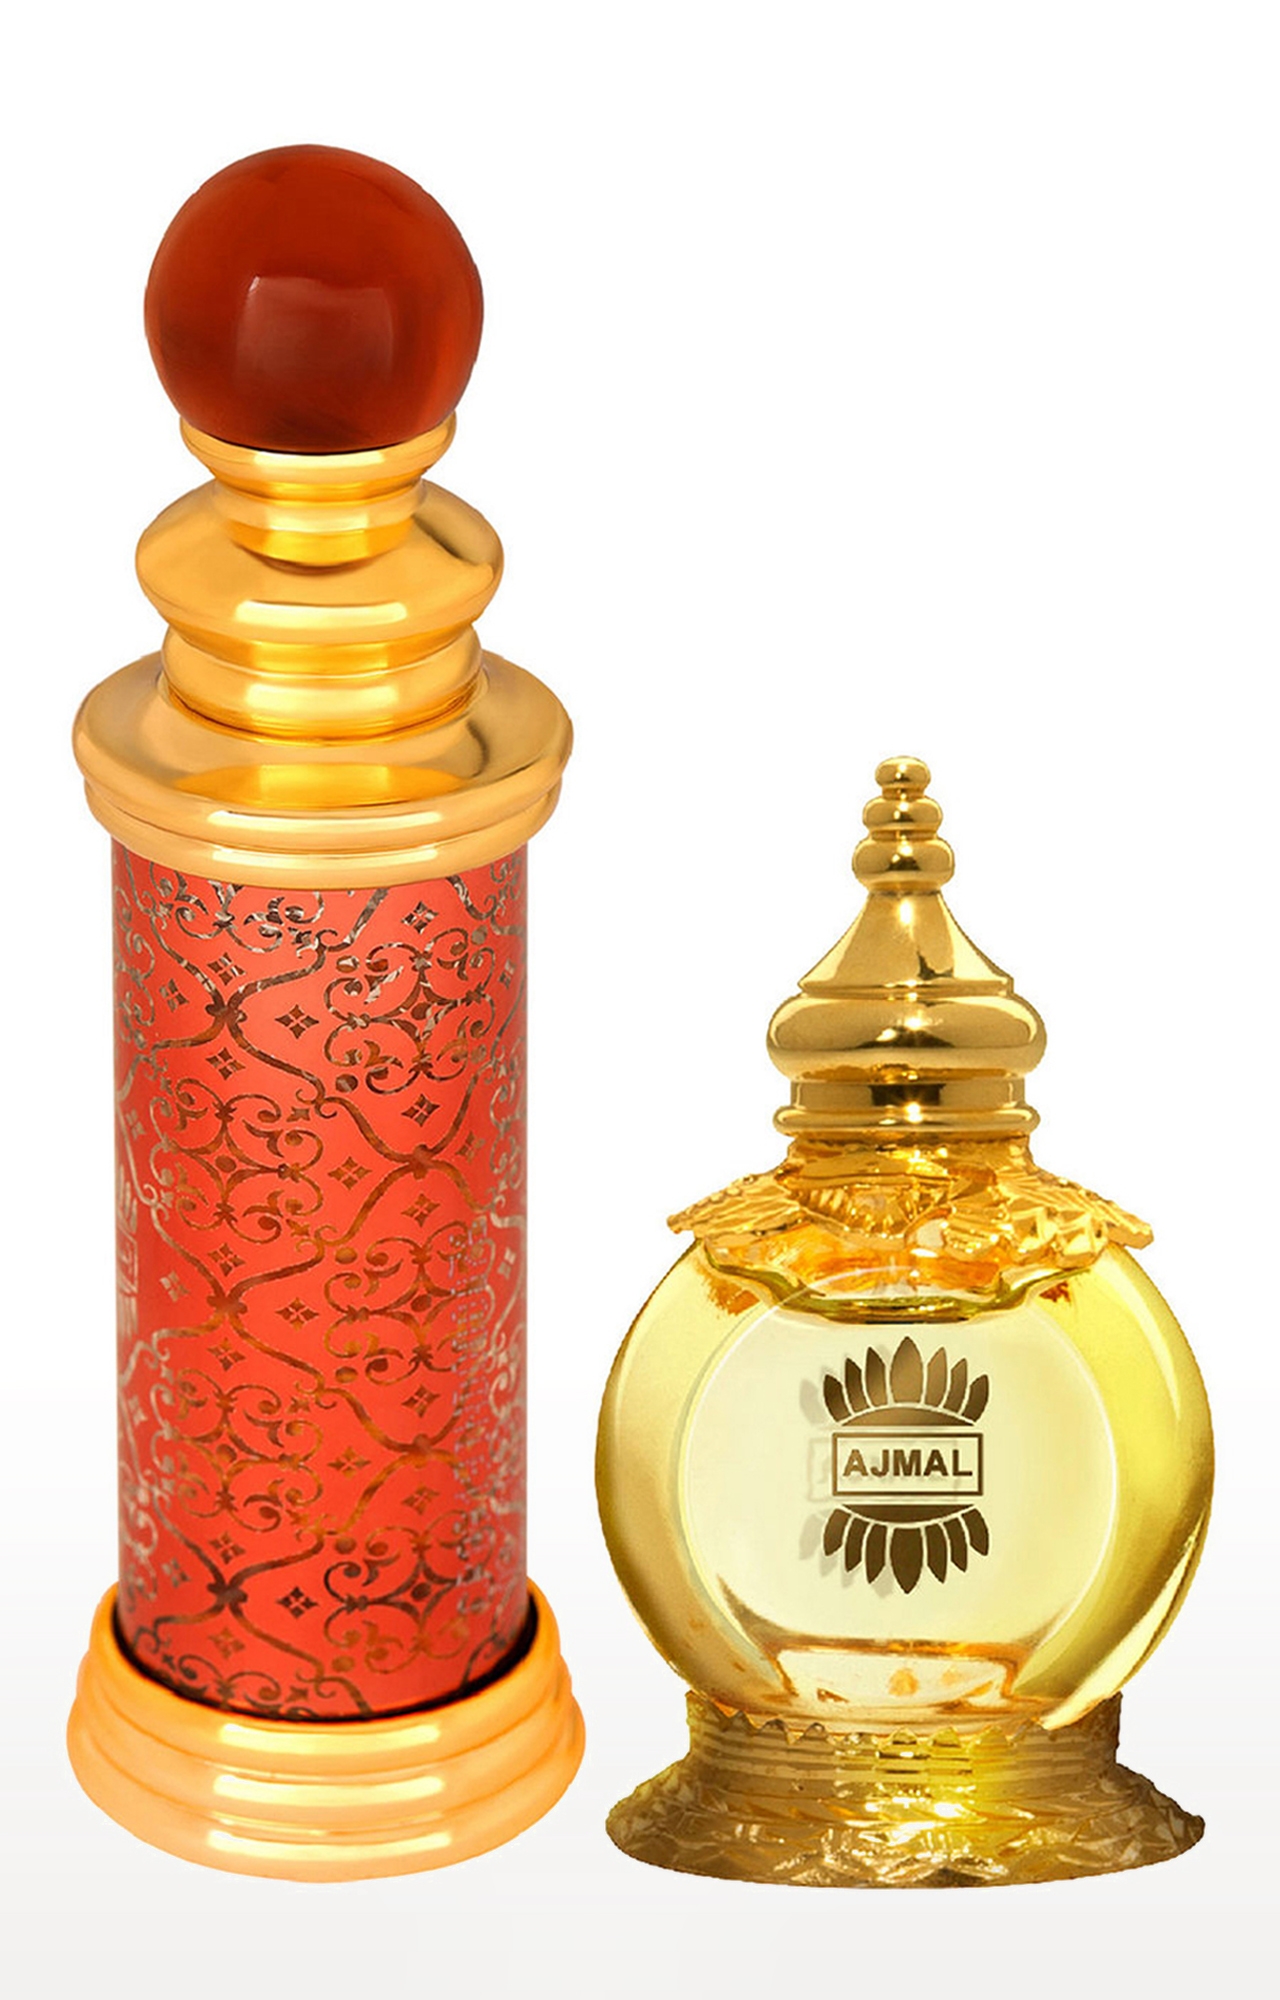 Ajmal | Ajmal Classic Oud Concentrated Perfume Oil Oudh Alcohol-free Attar 10ml for Unisex and Mukhallat AL Wafa Concentrated Perfume Oil Oriental Musky Alcohol-free Attar 12ml for Unisex